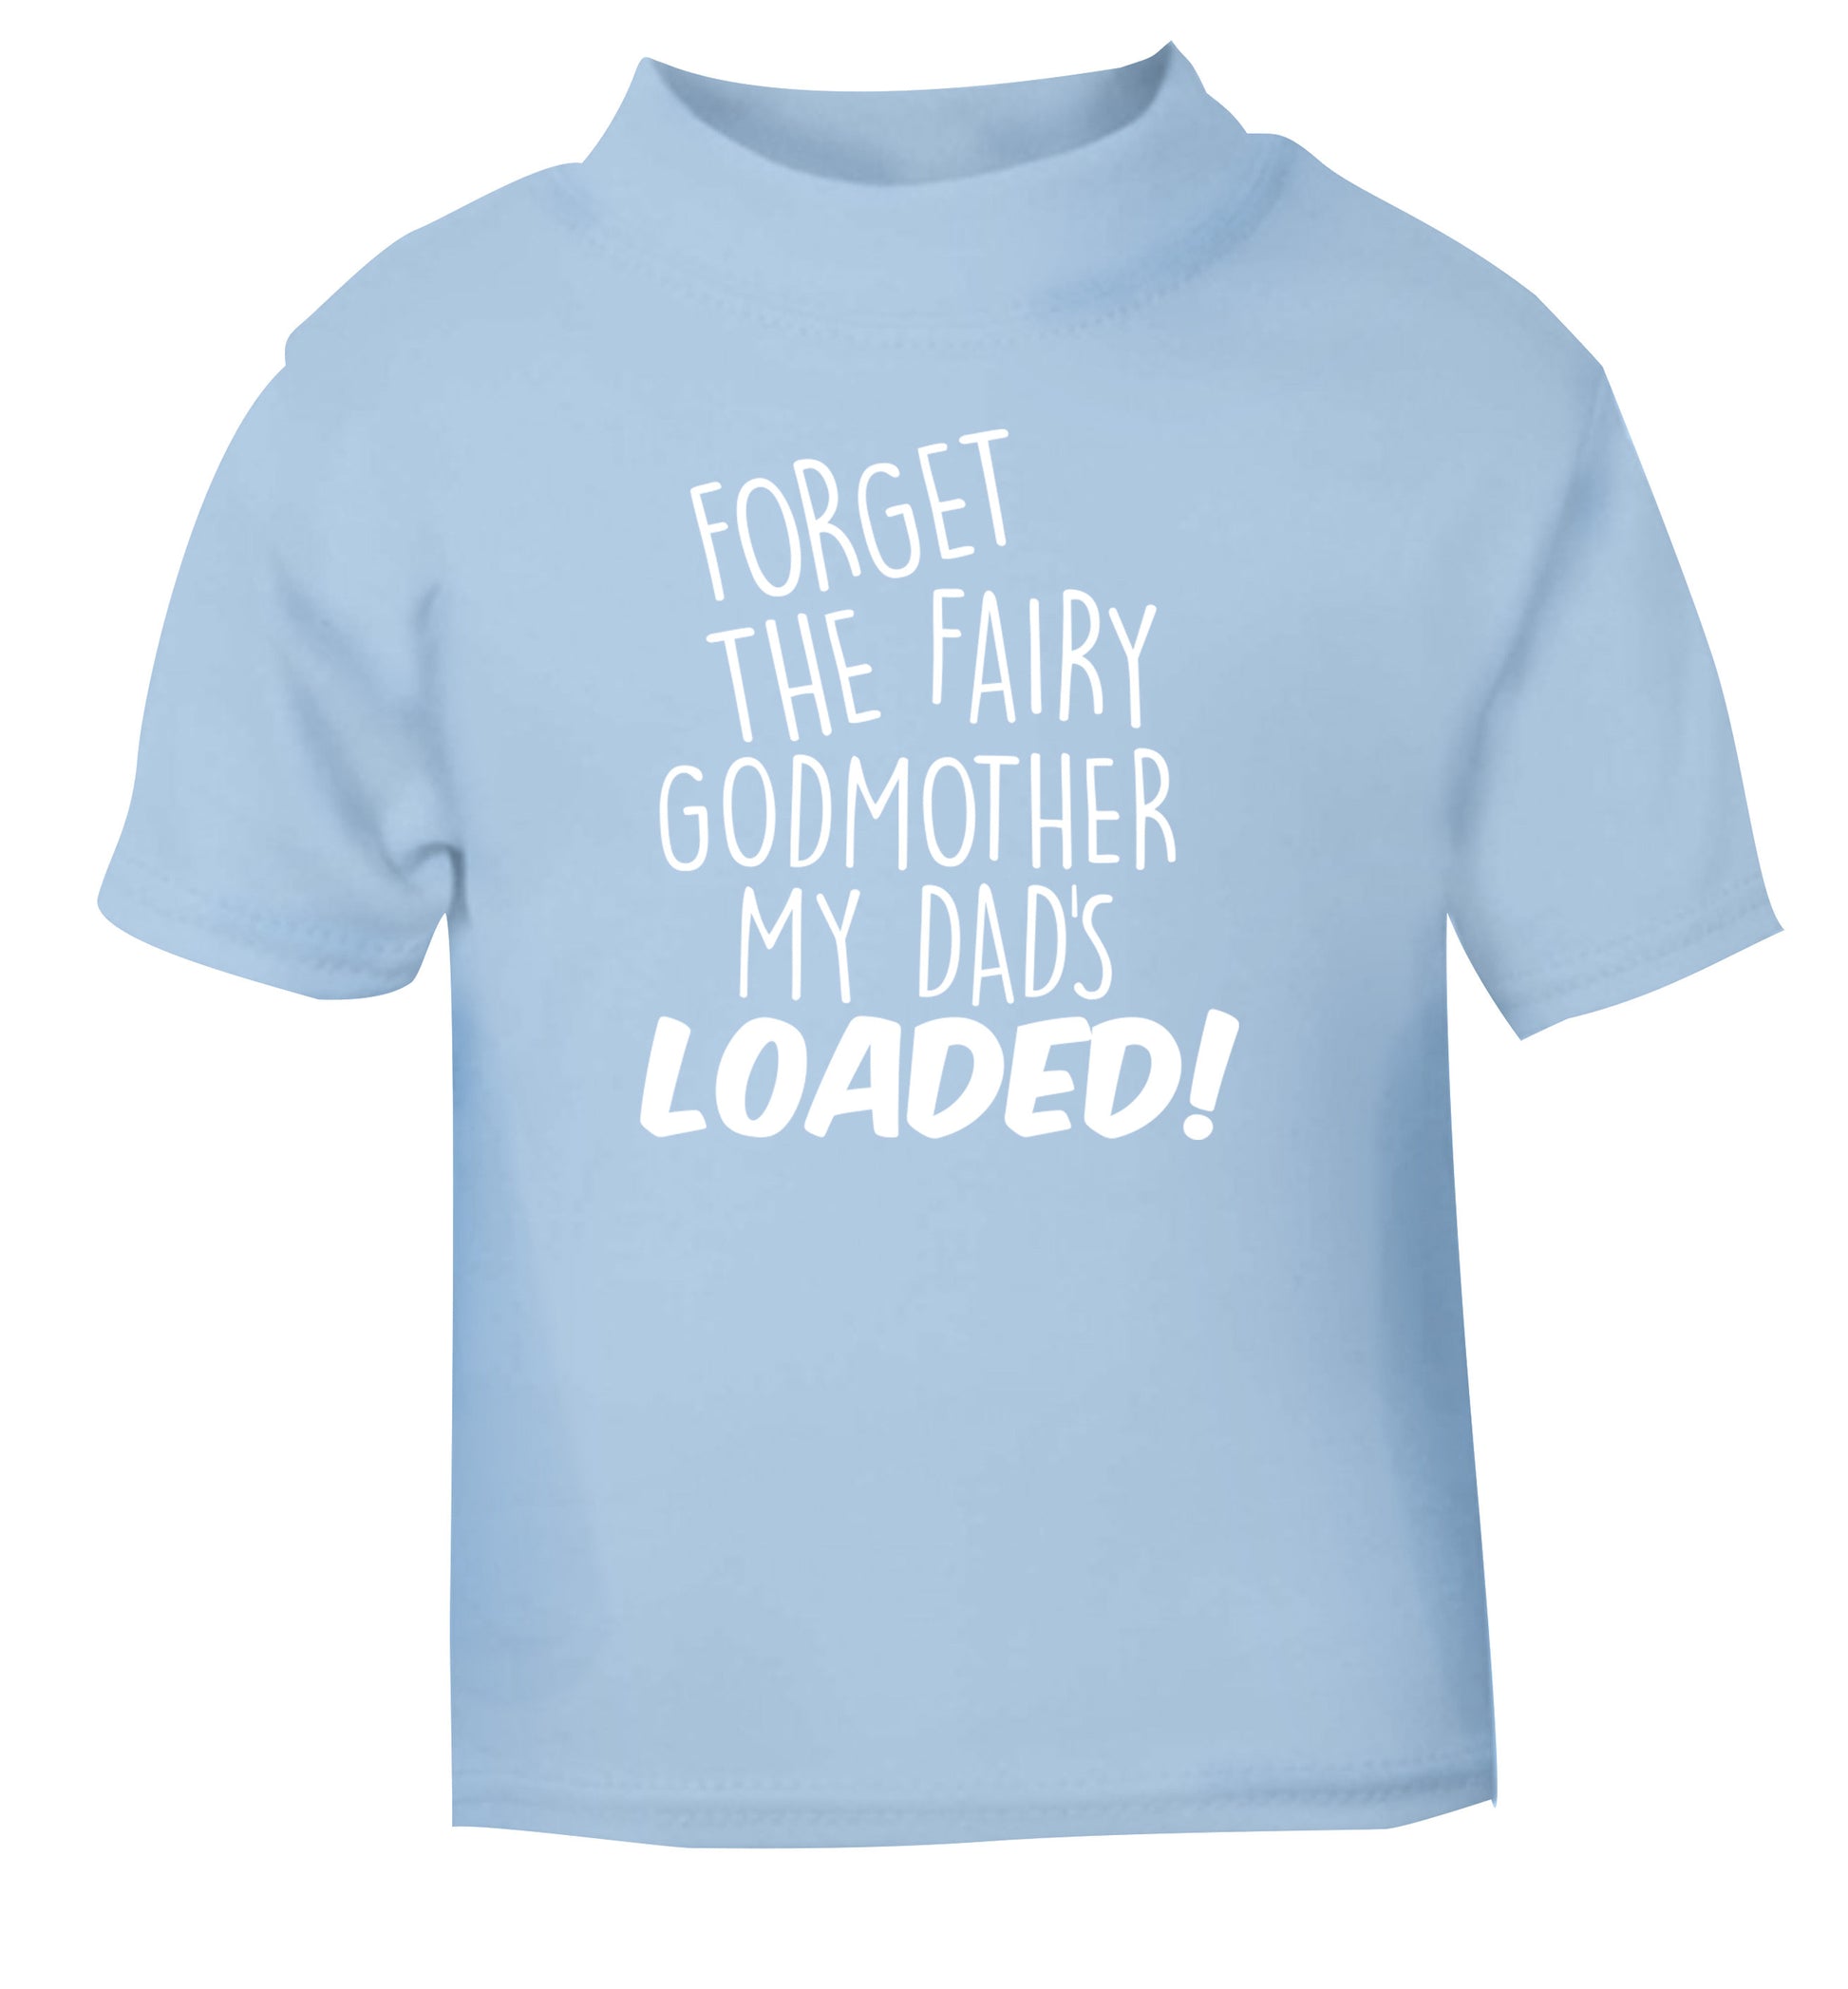 Forget the fairy godmother my dad's loaded light blue Baby Toddler Tshirt 2 Years